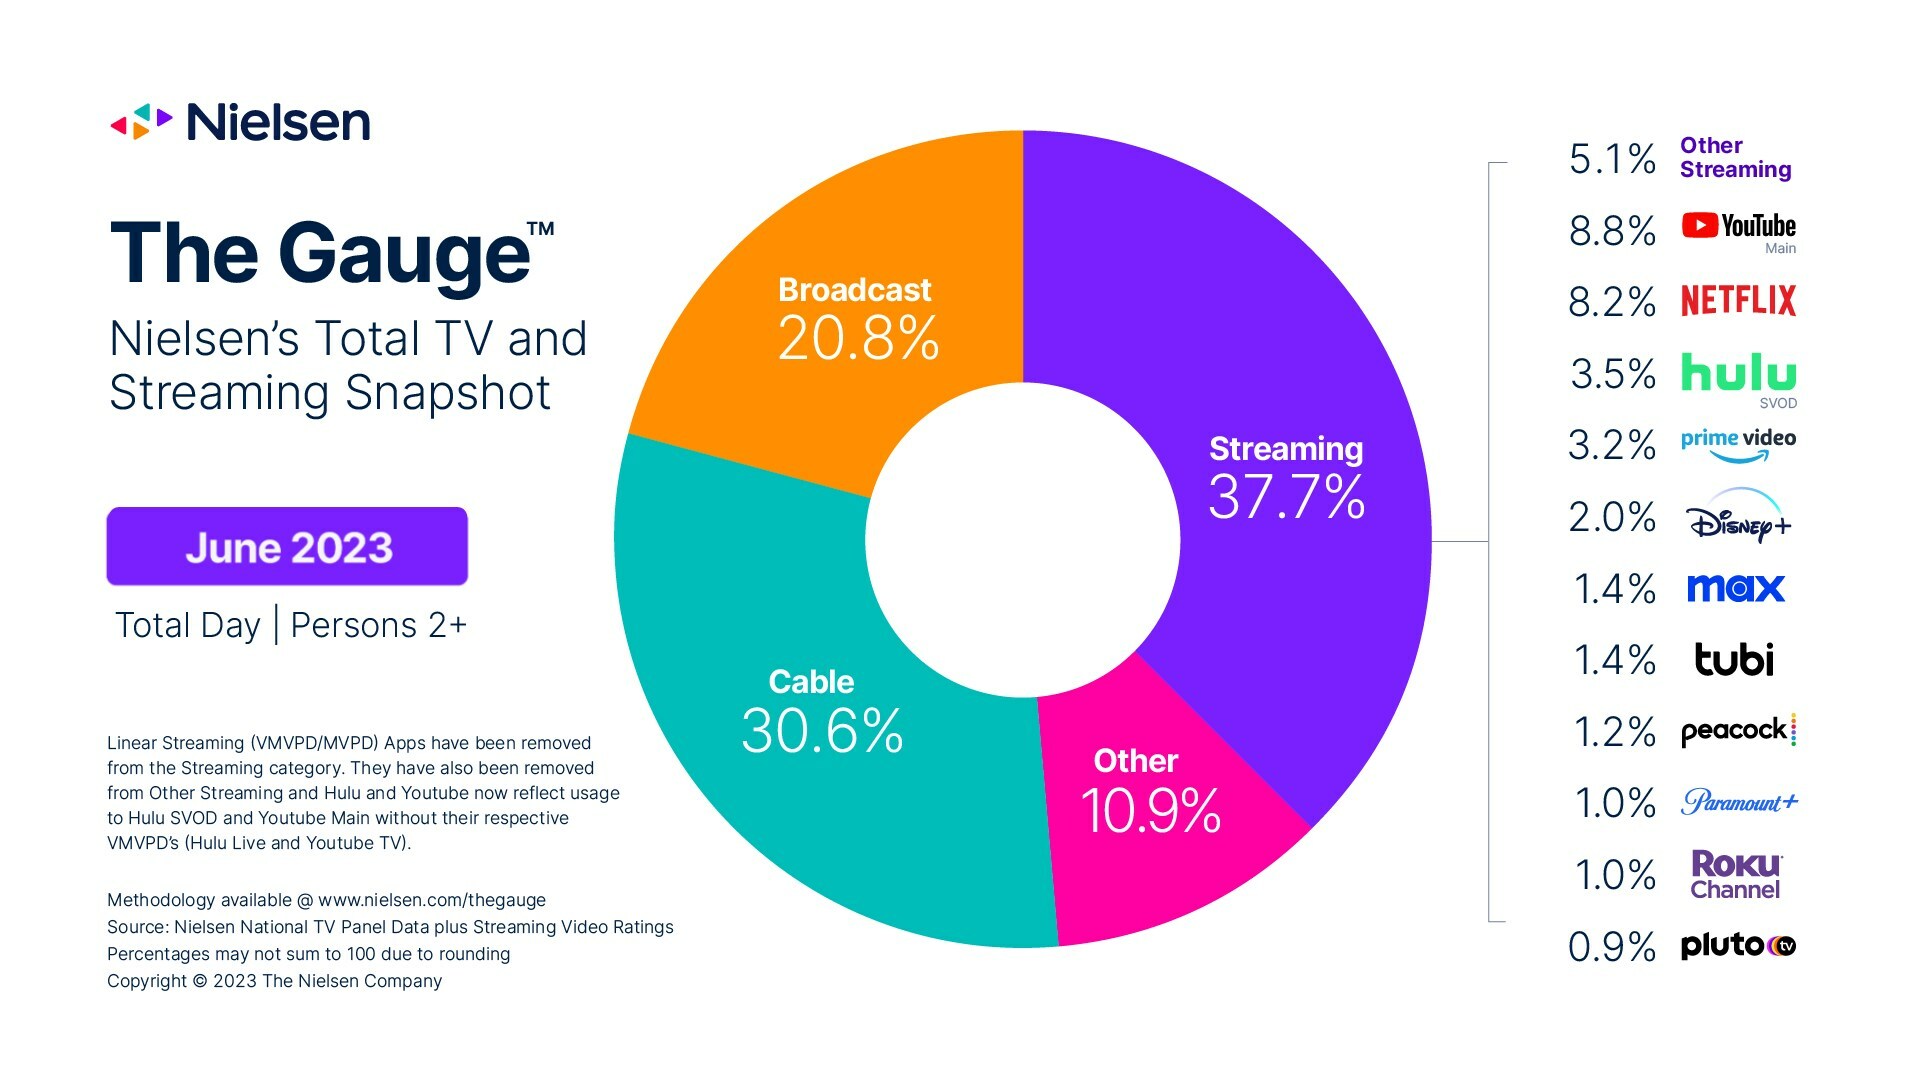 Nielsen The Gauge - Broadcast, Cable TV, Streaming (YouTube, Netflix, Hulu, Prime Video, Disney+, MAX, tubi, Peacock, Paramount+, Roku Channel, Pluto TV, Other streaming), Other - June 2023